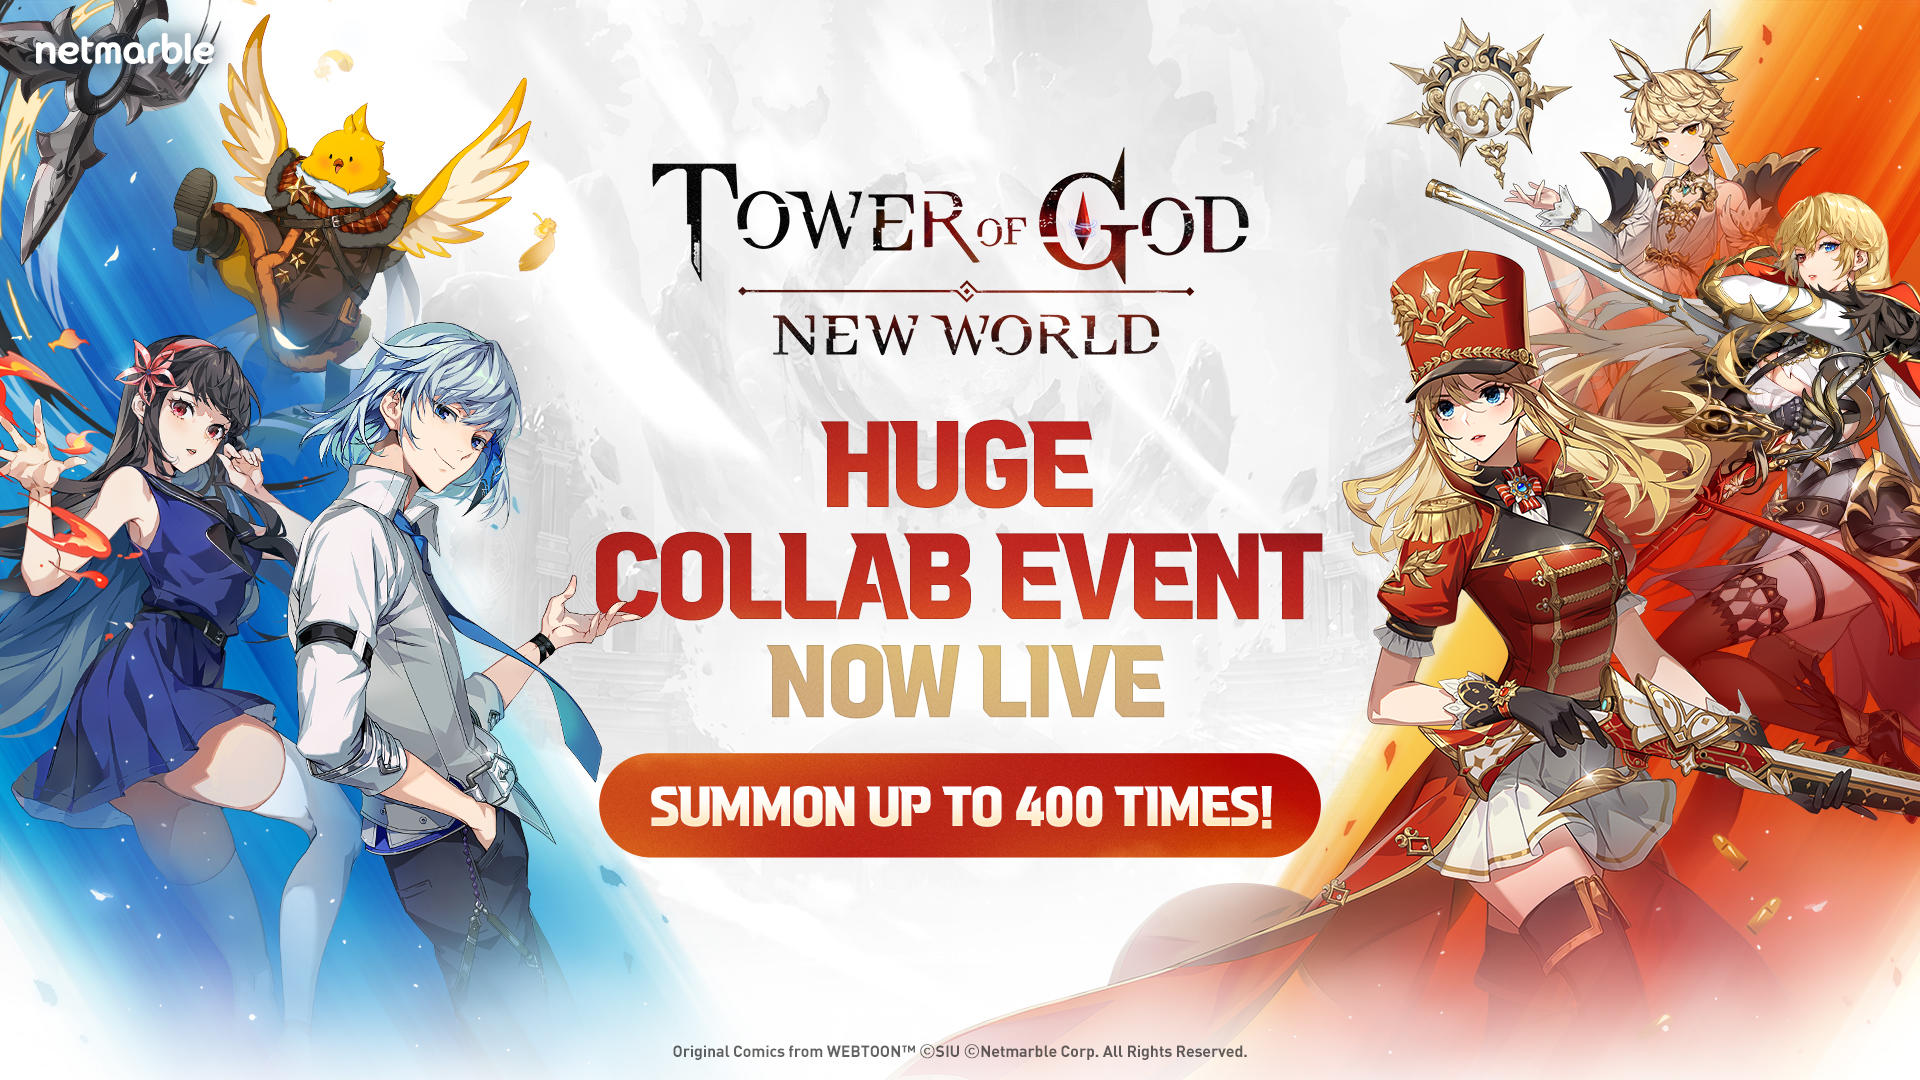 Tower of God: New World Launches July 26 - But Why Tho?